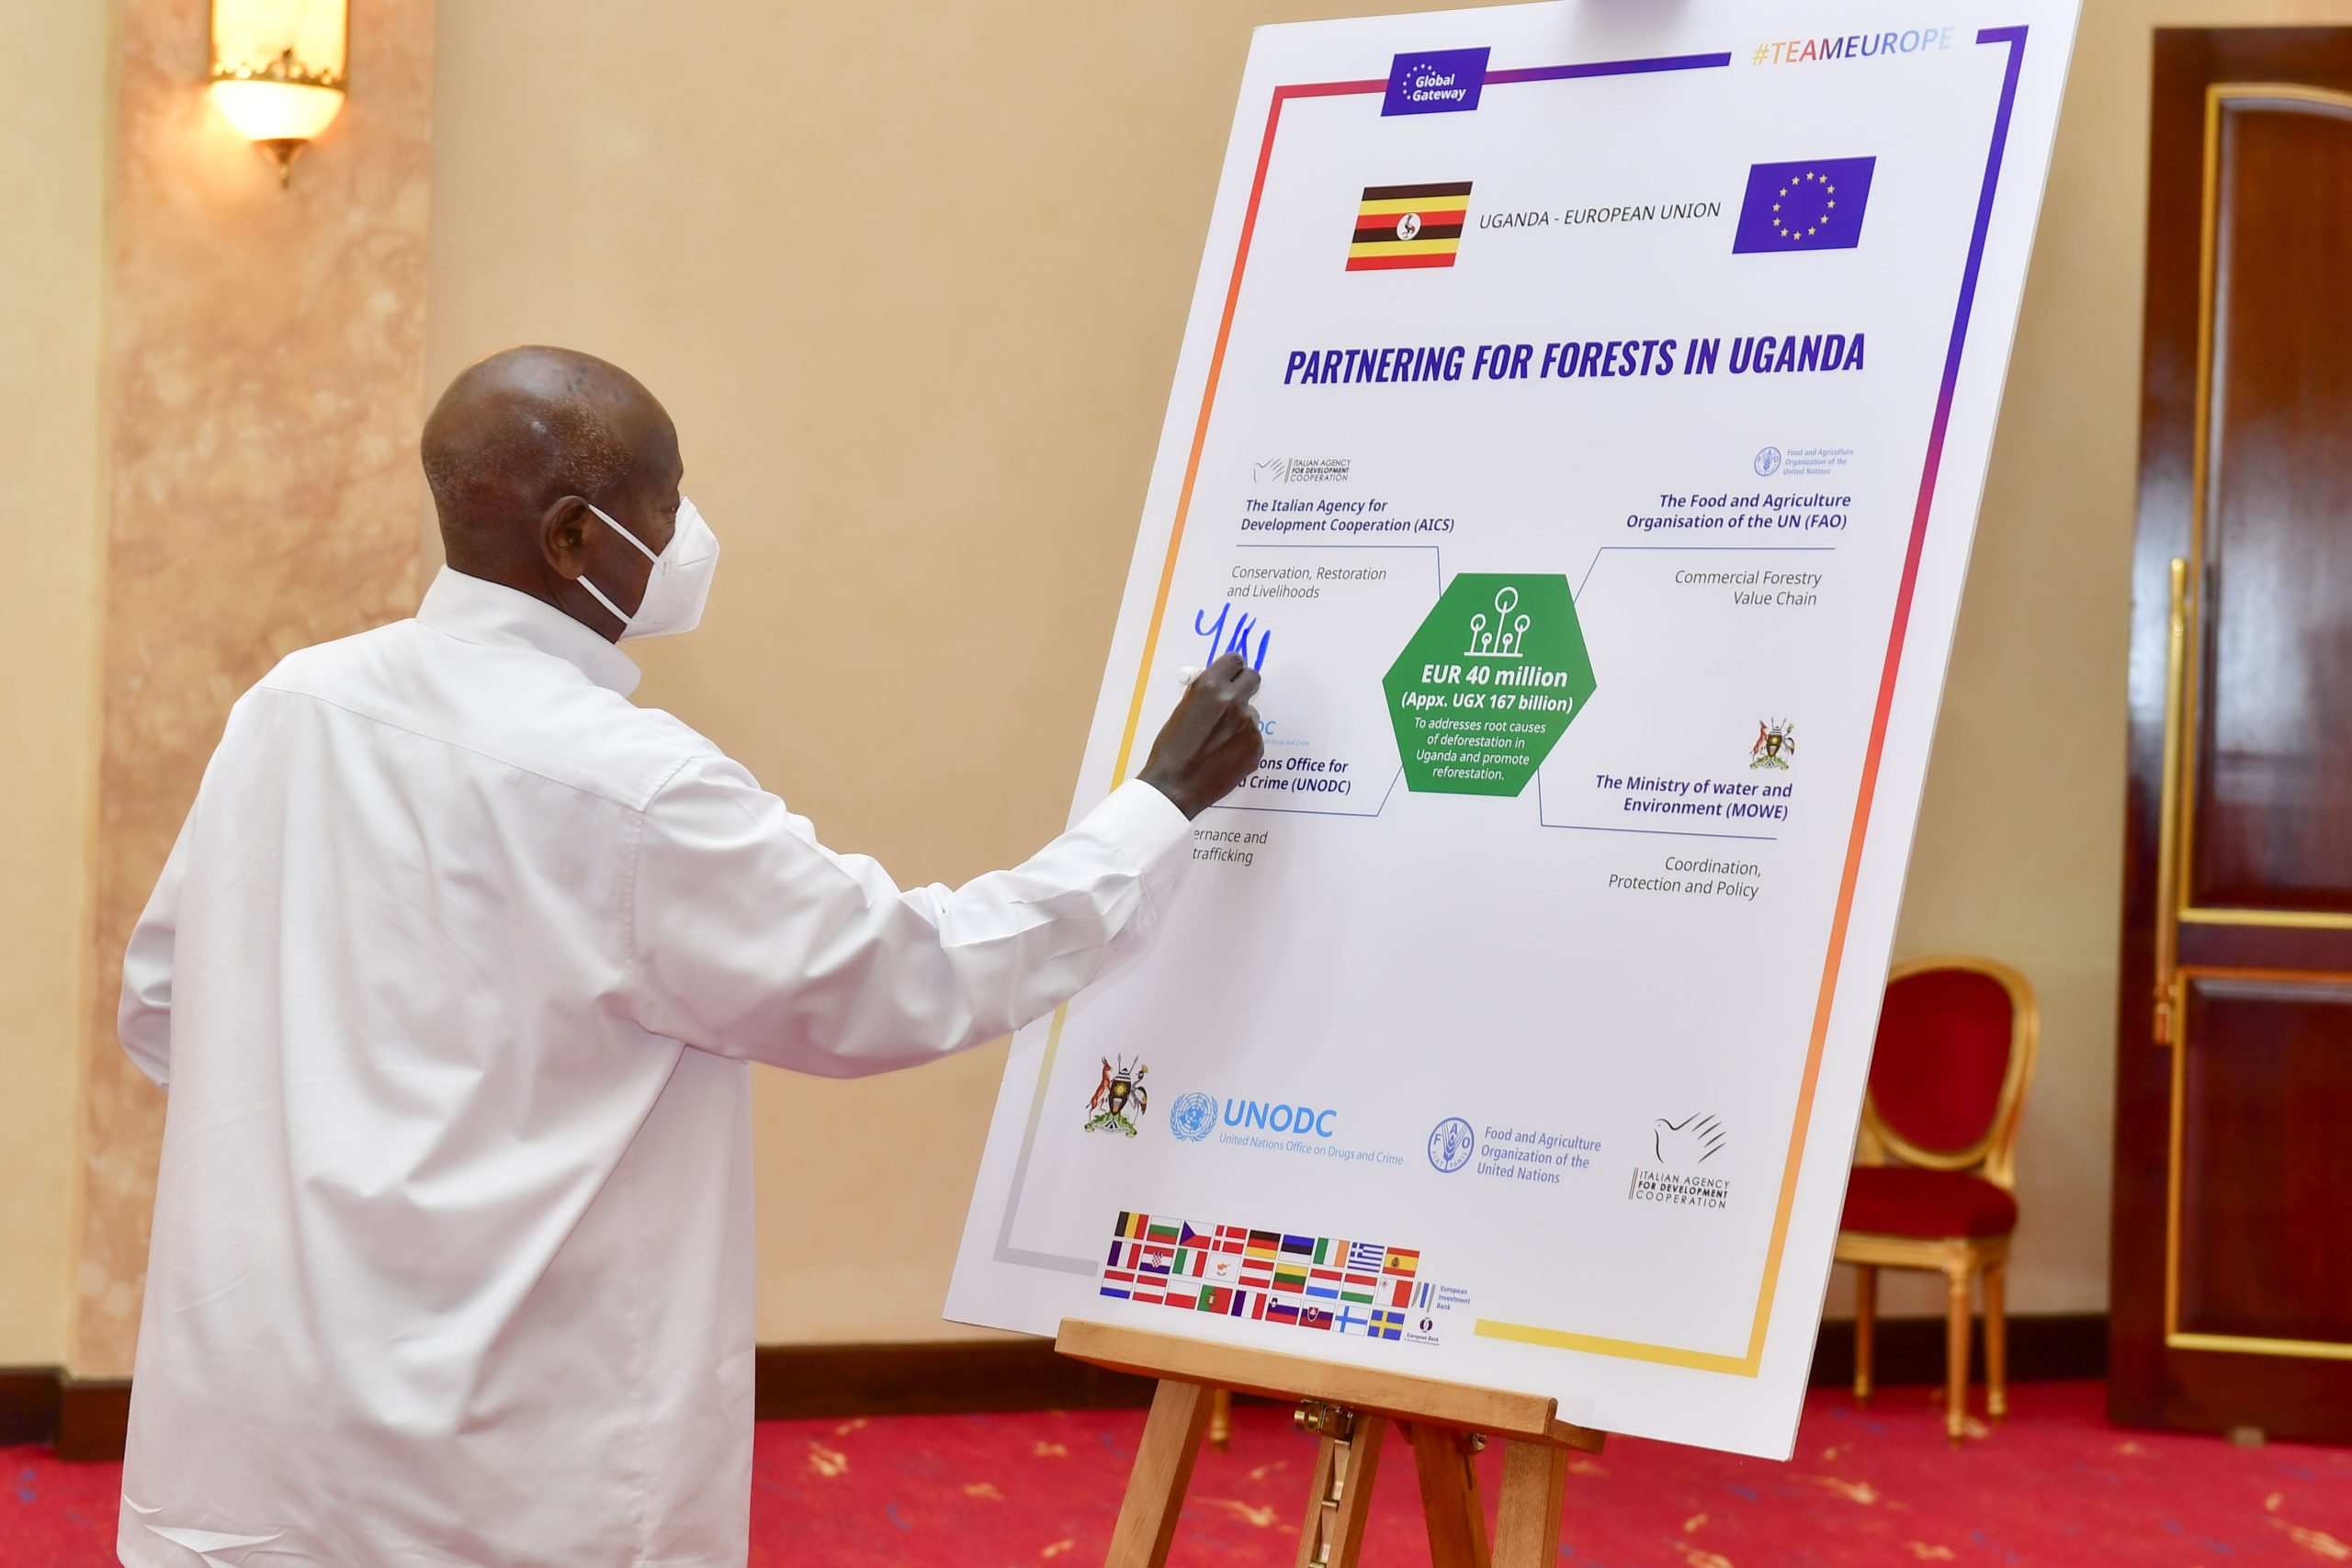 President Museveni and EU Commissioner Inuagurate Forest Partnership Agreement